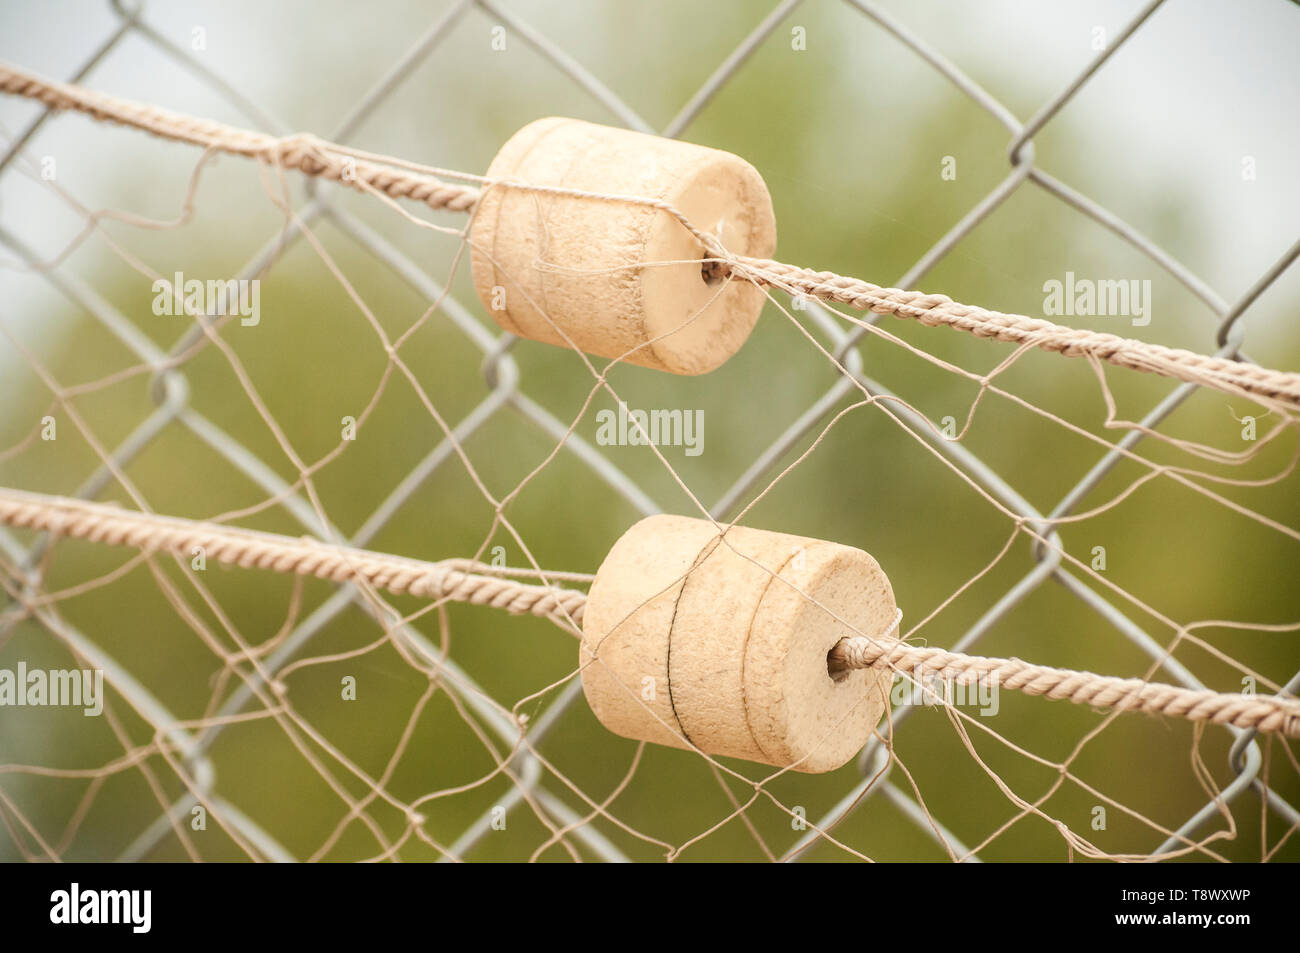 https://c8.alamy.com/comp/T8WXWP/fishing-net-with-cork-floats-on-wire-mesh-closeup-as-decorative-background-T8WXWP.jpg